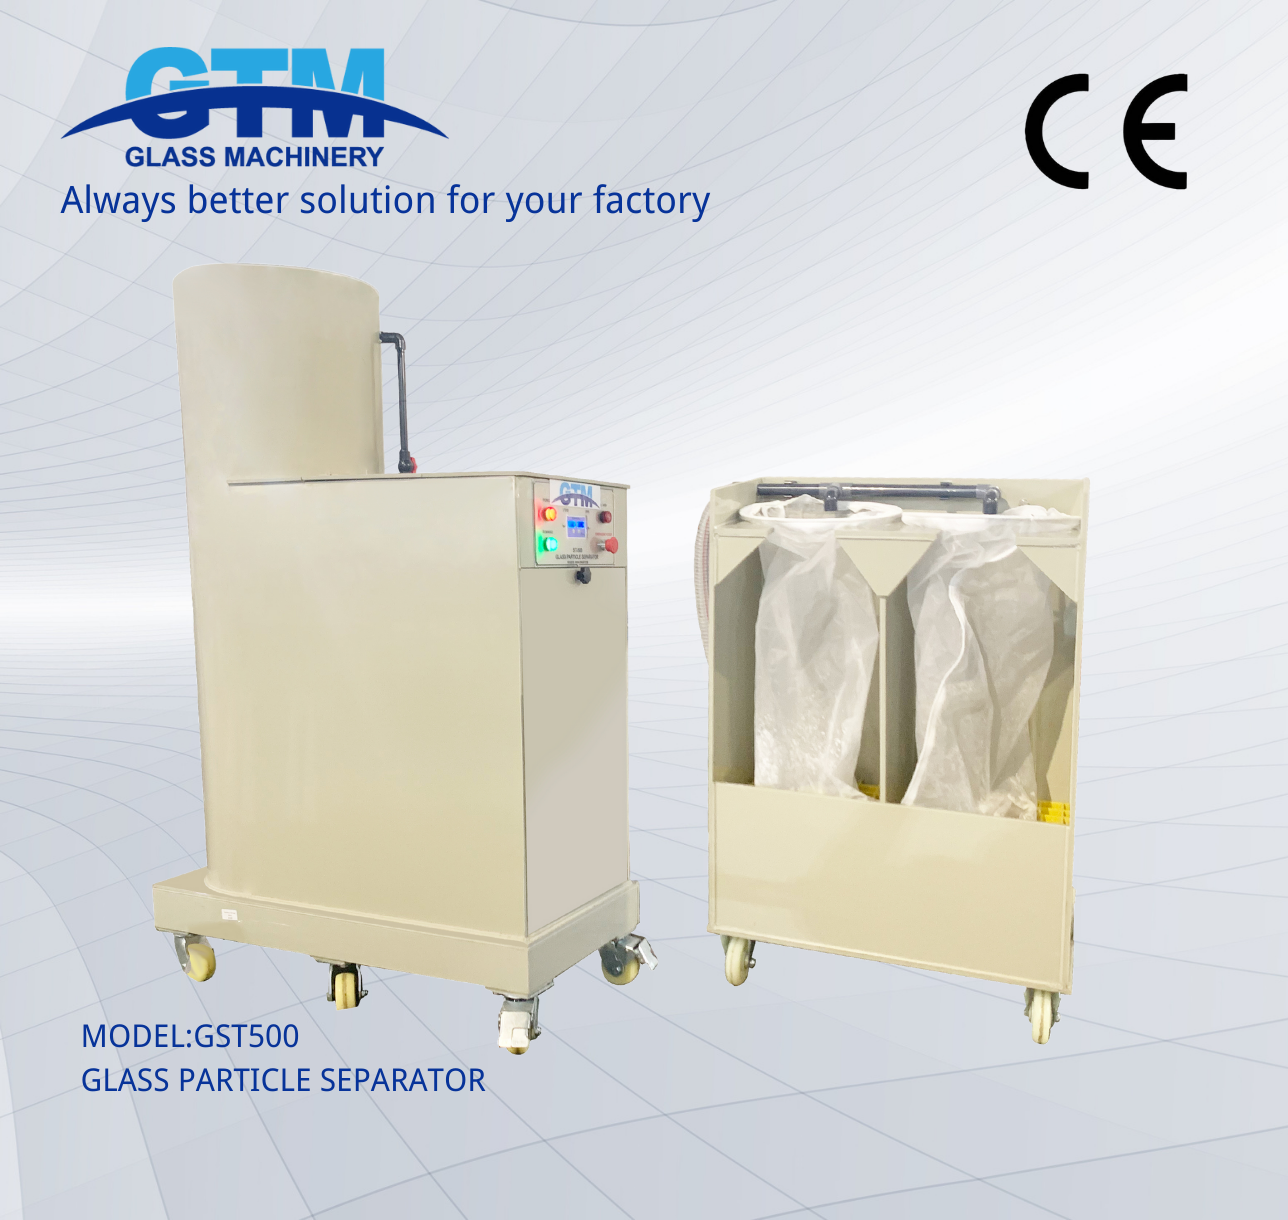 GST500 Glass Particle Separator